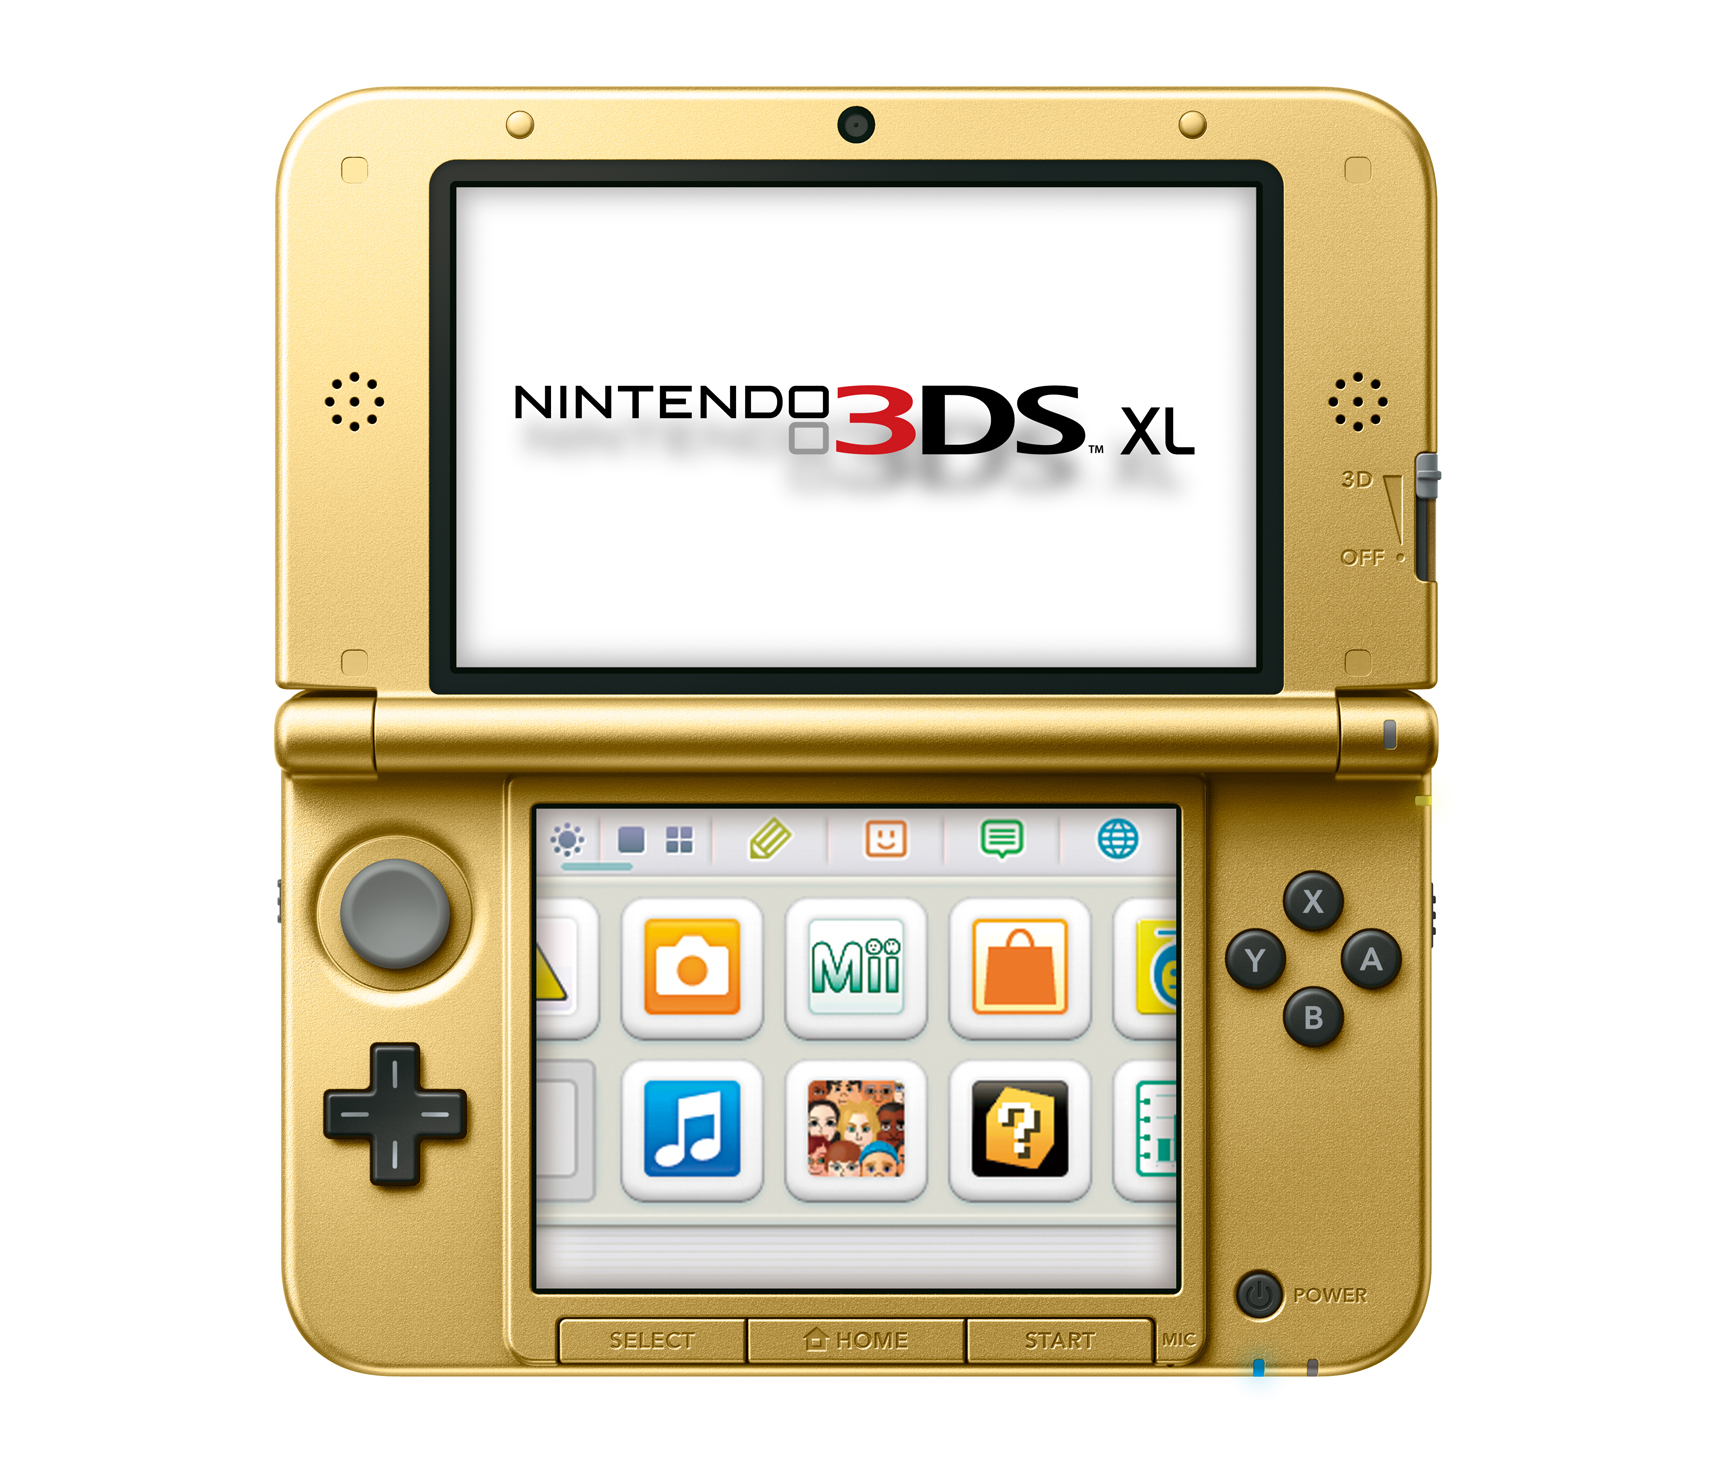 new 3ds eb games